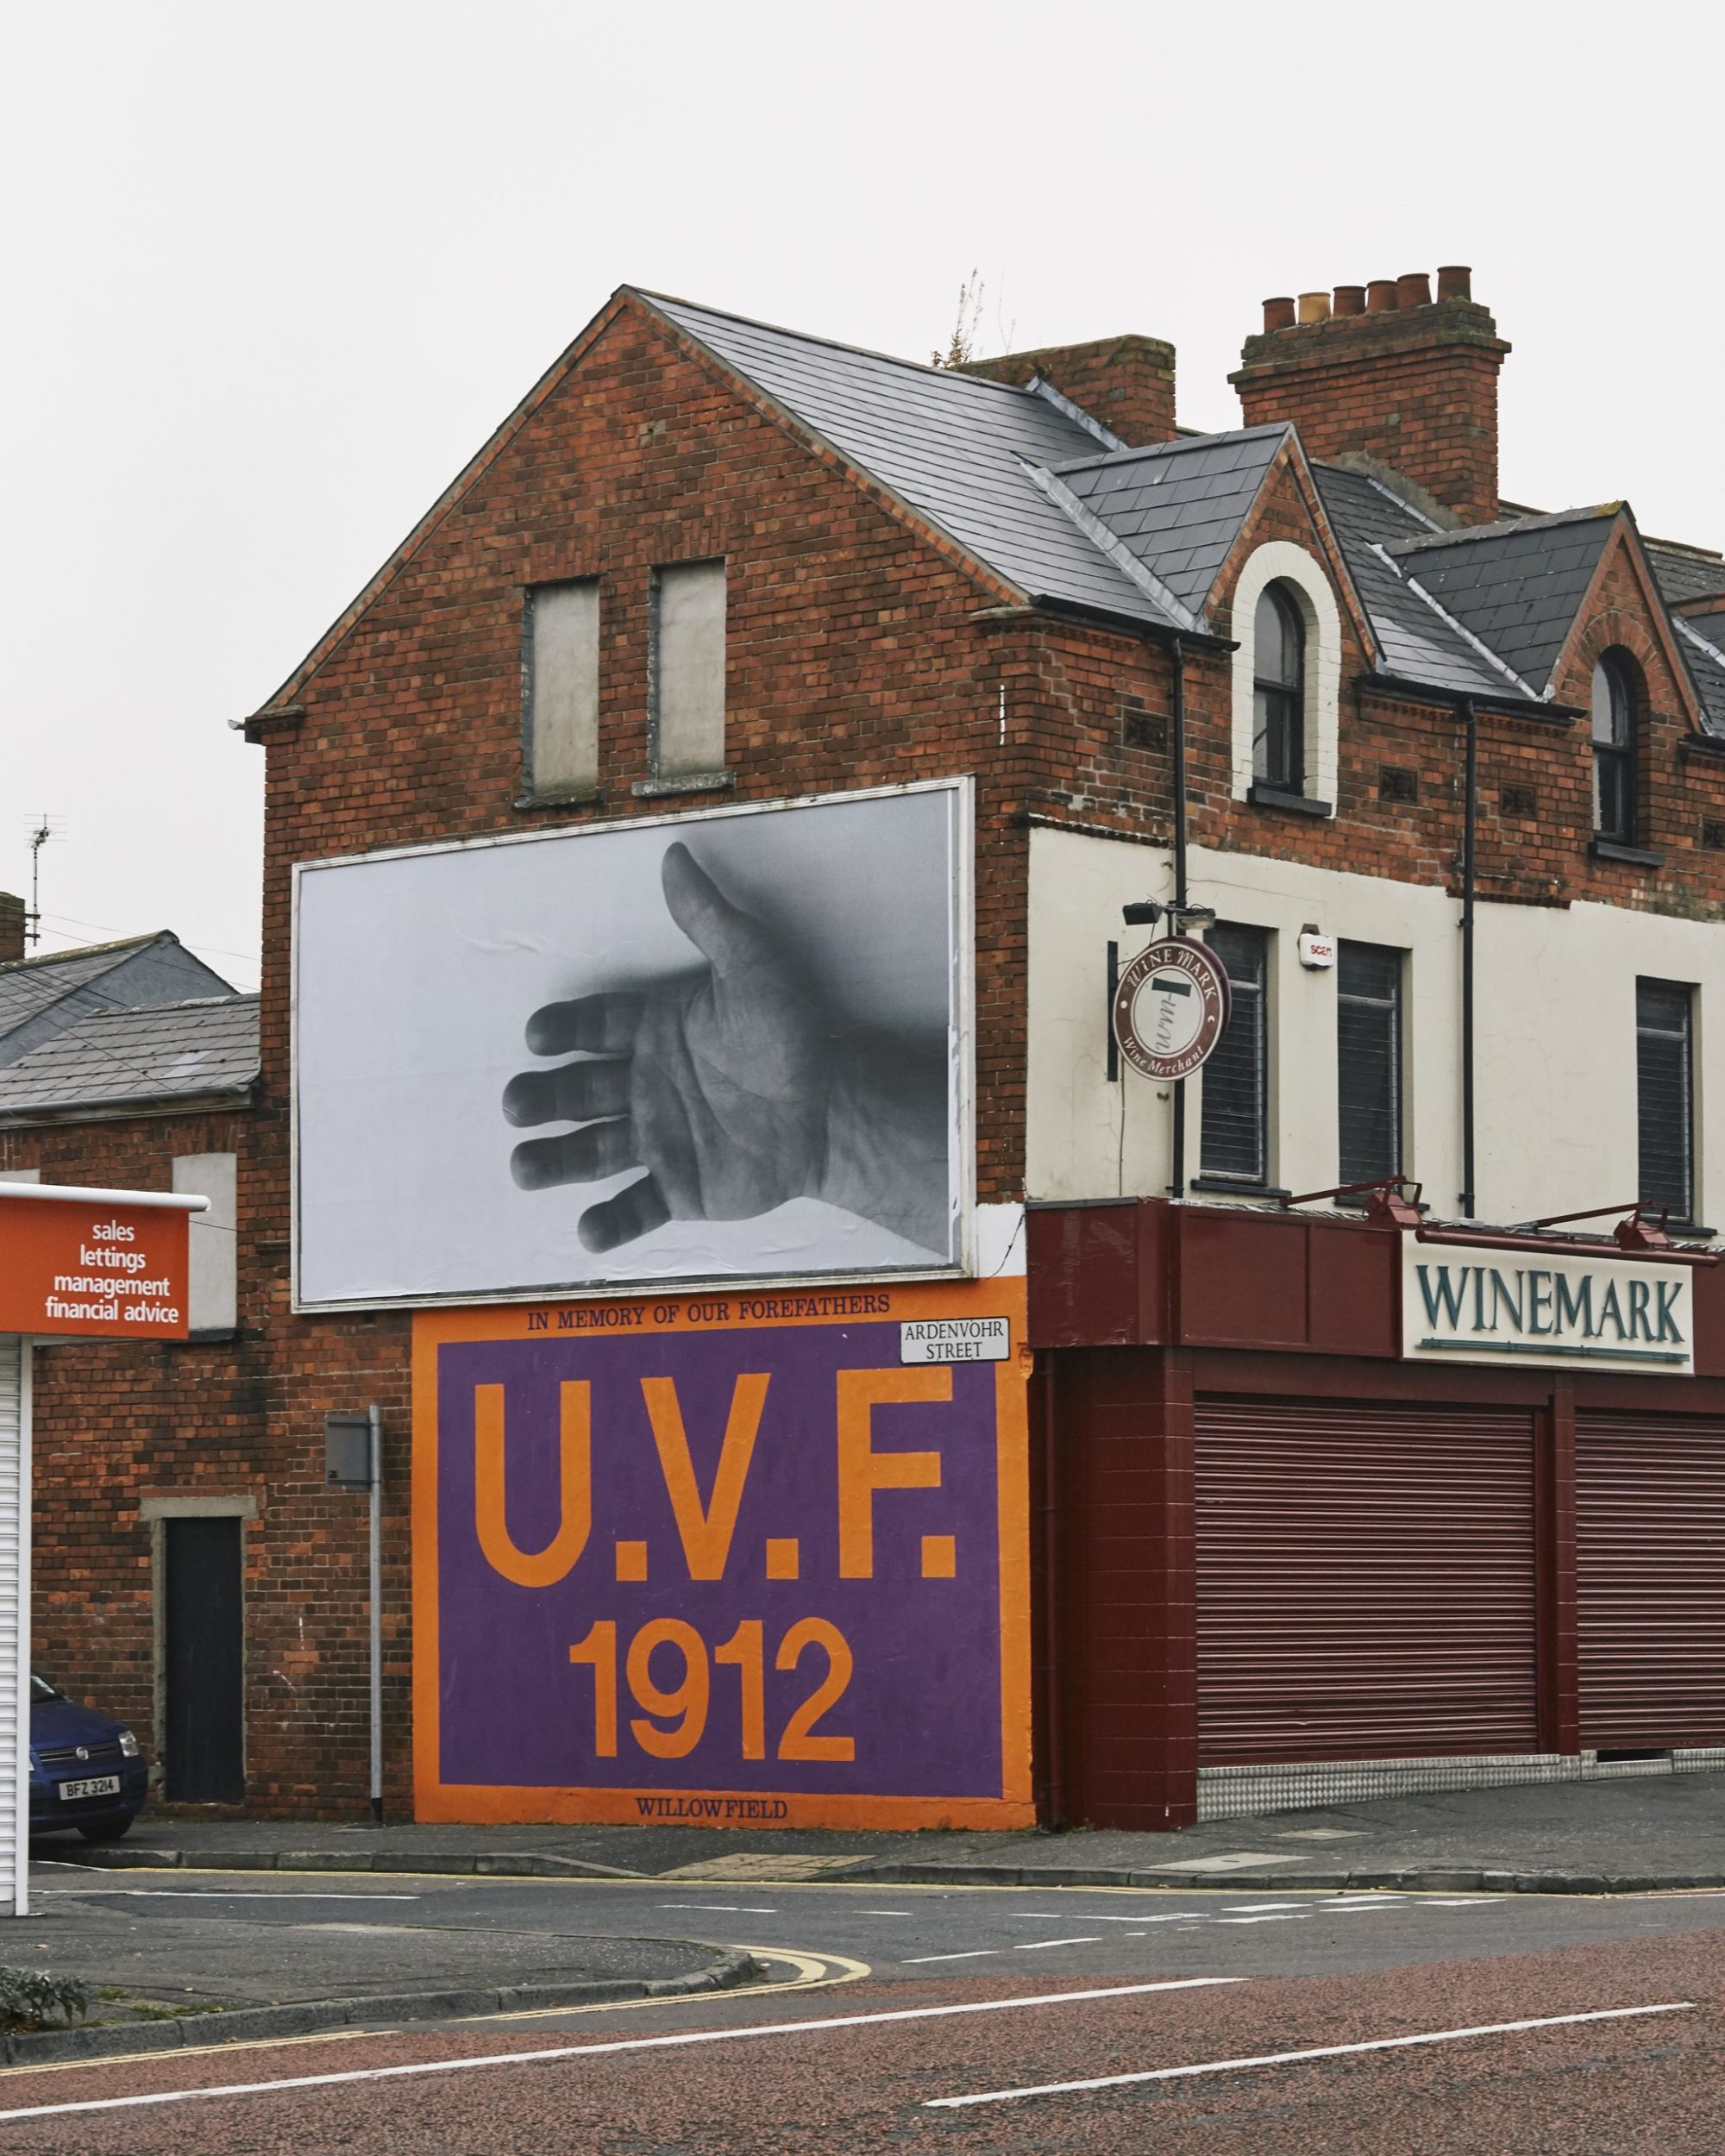 On the side of a tall brick building there is an a billboard featuring a black and white photograph of a hand, open and extending from the right side of frame. Underneath the display stands another signage which stated 